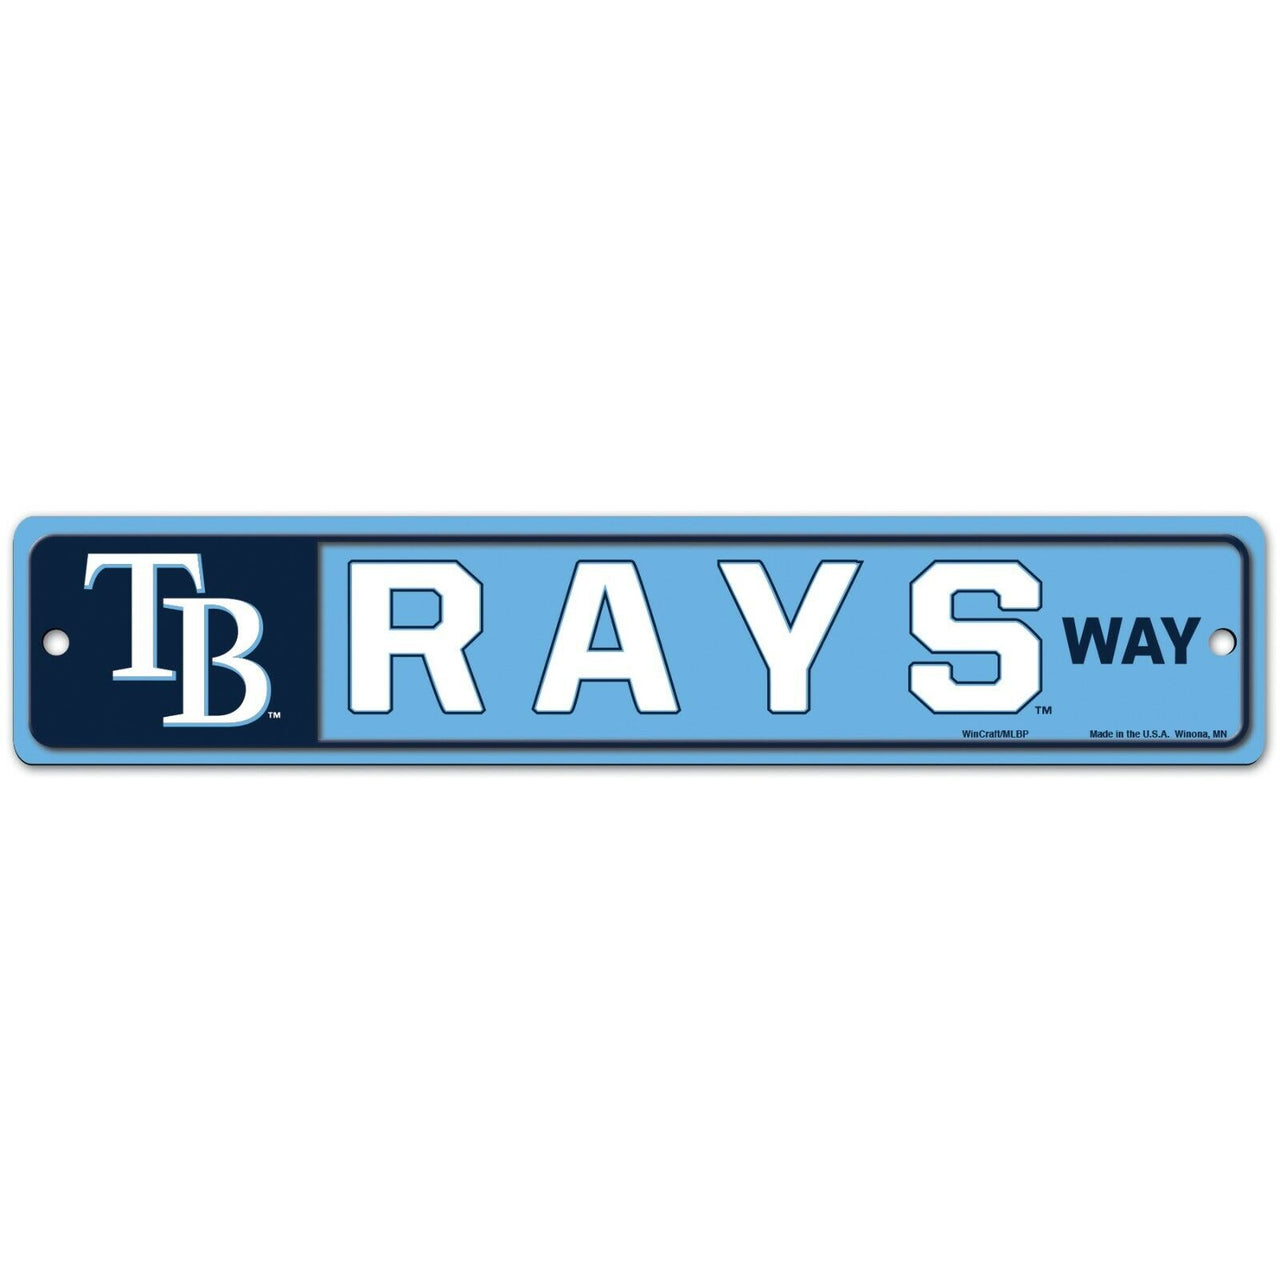 Tampa Bay Rays Street Sign